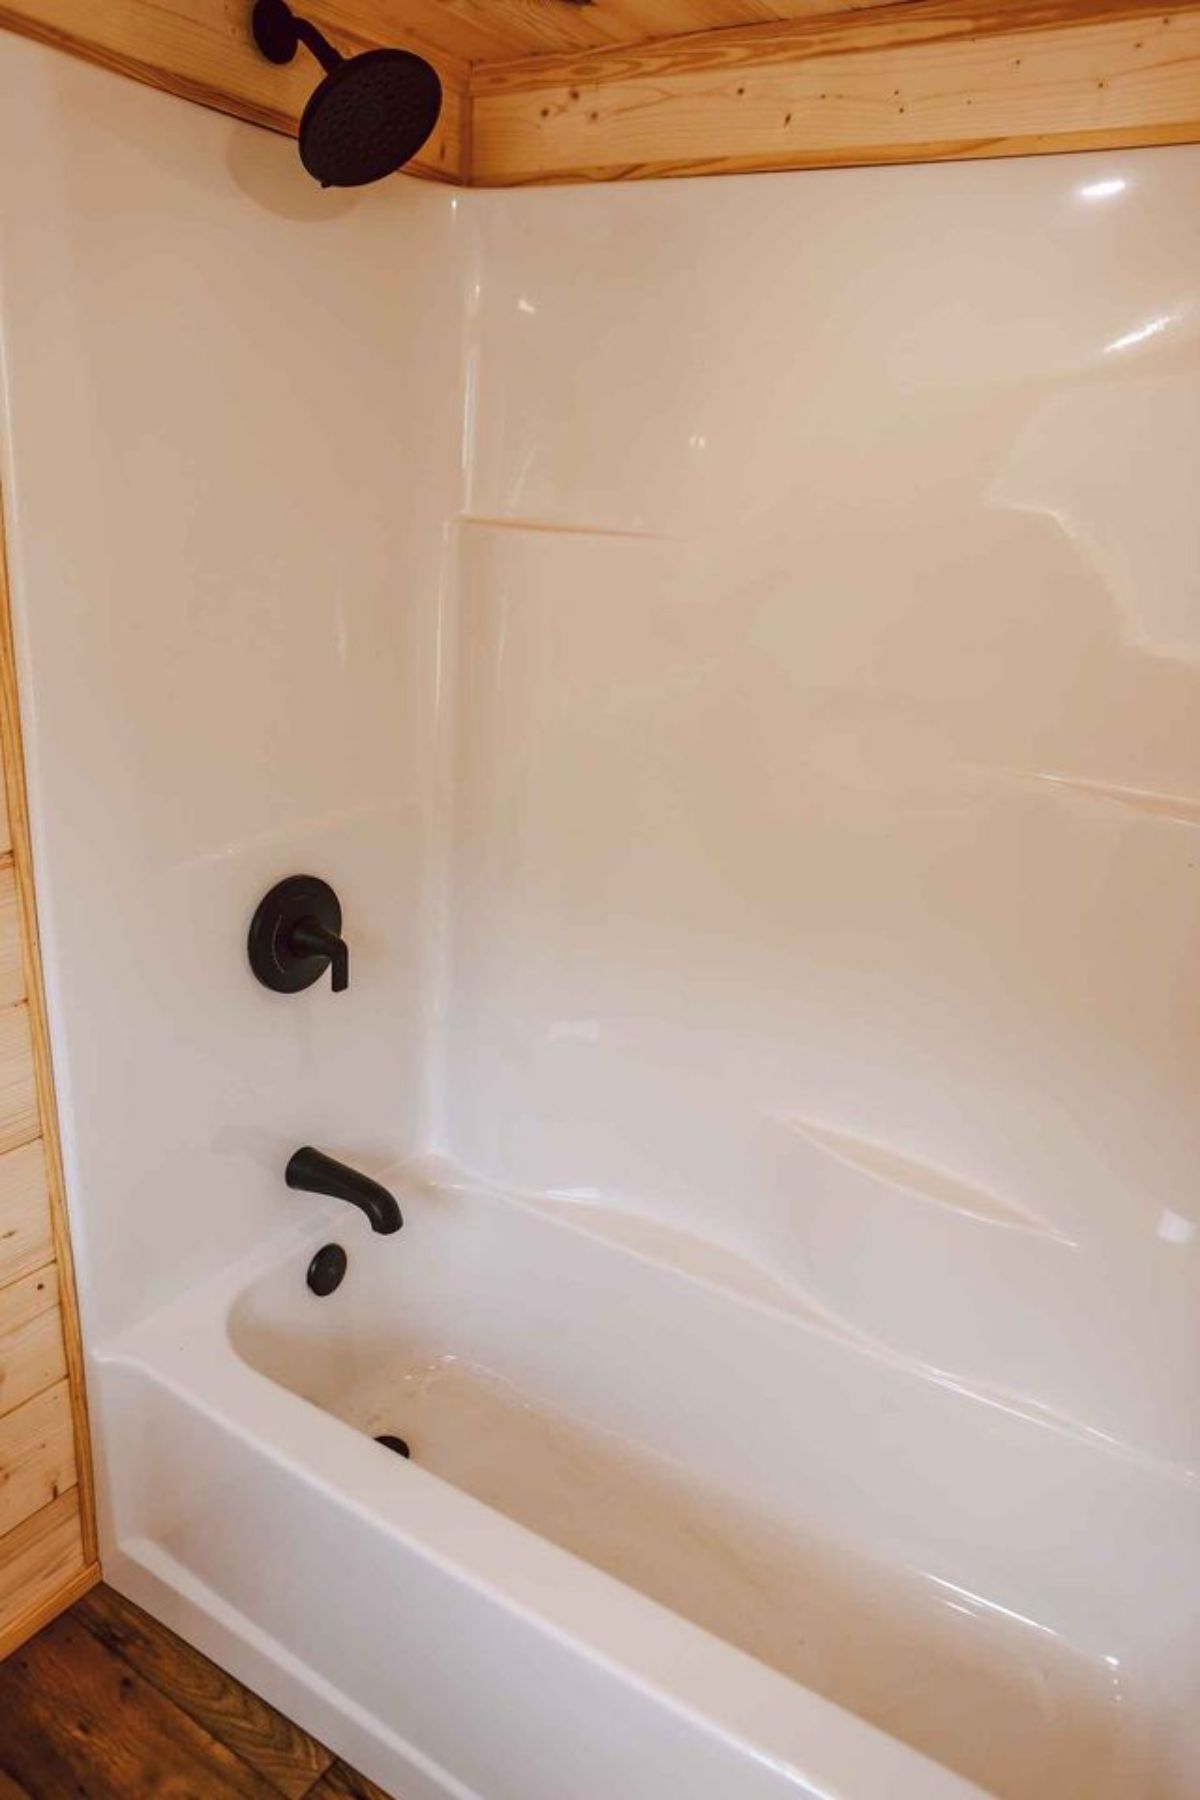 bathtub is included in the bathroom of spacious tiny house on wheels